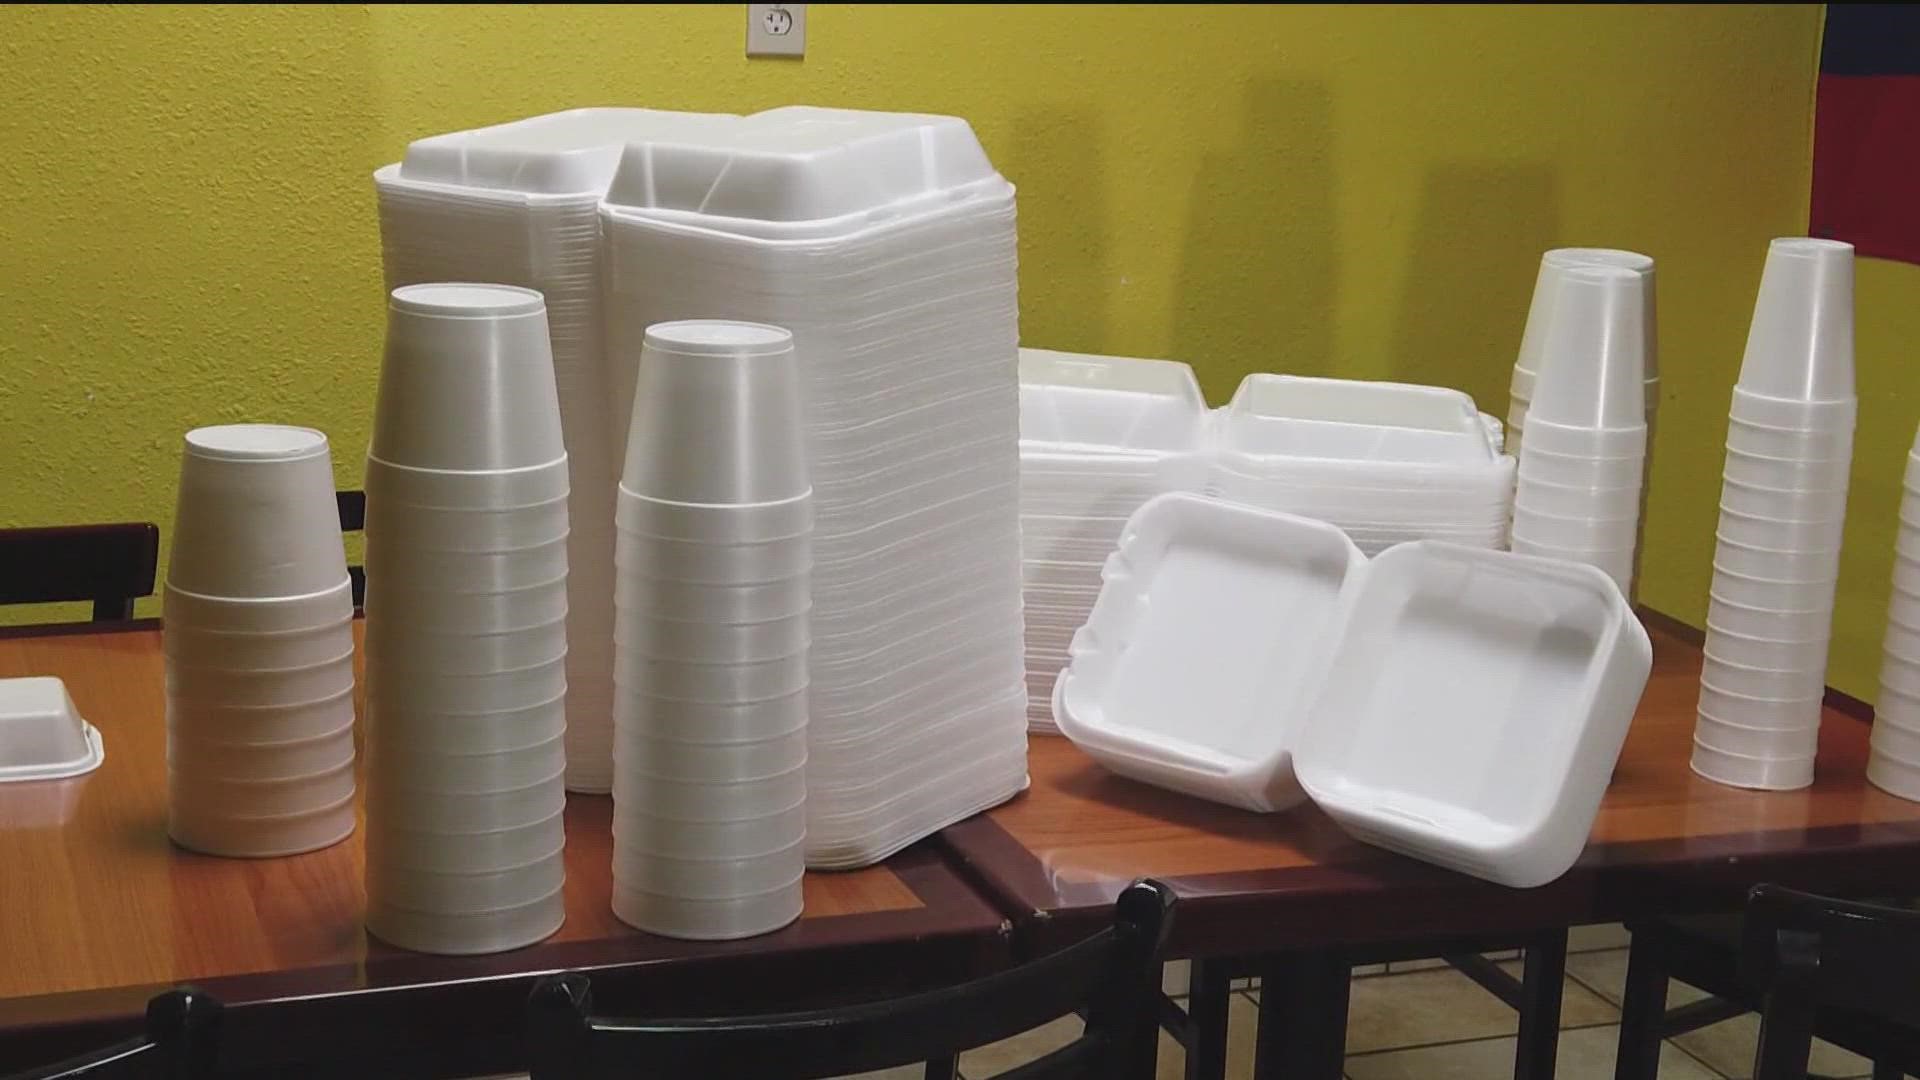 San Diegans may soon see new rules for single-use plastics, especially Styrofoam products such as to-go food containers and cups.